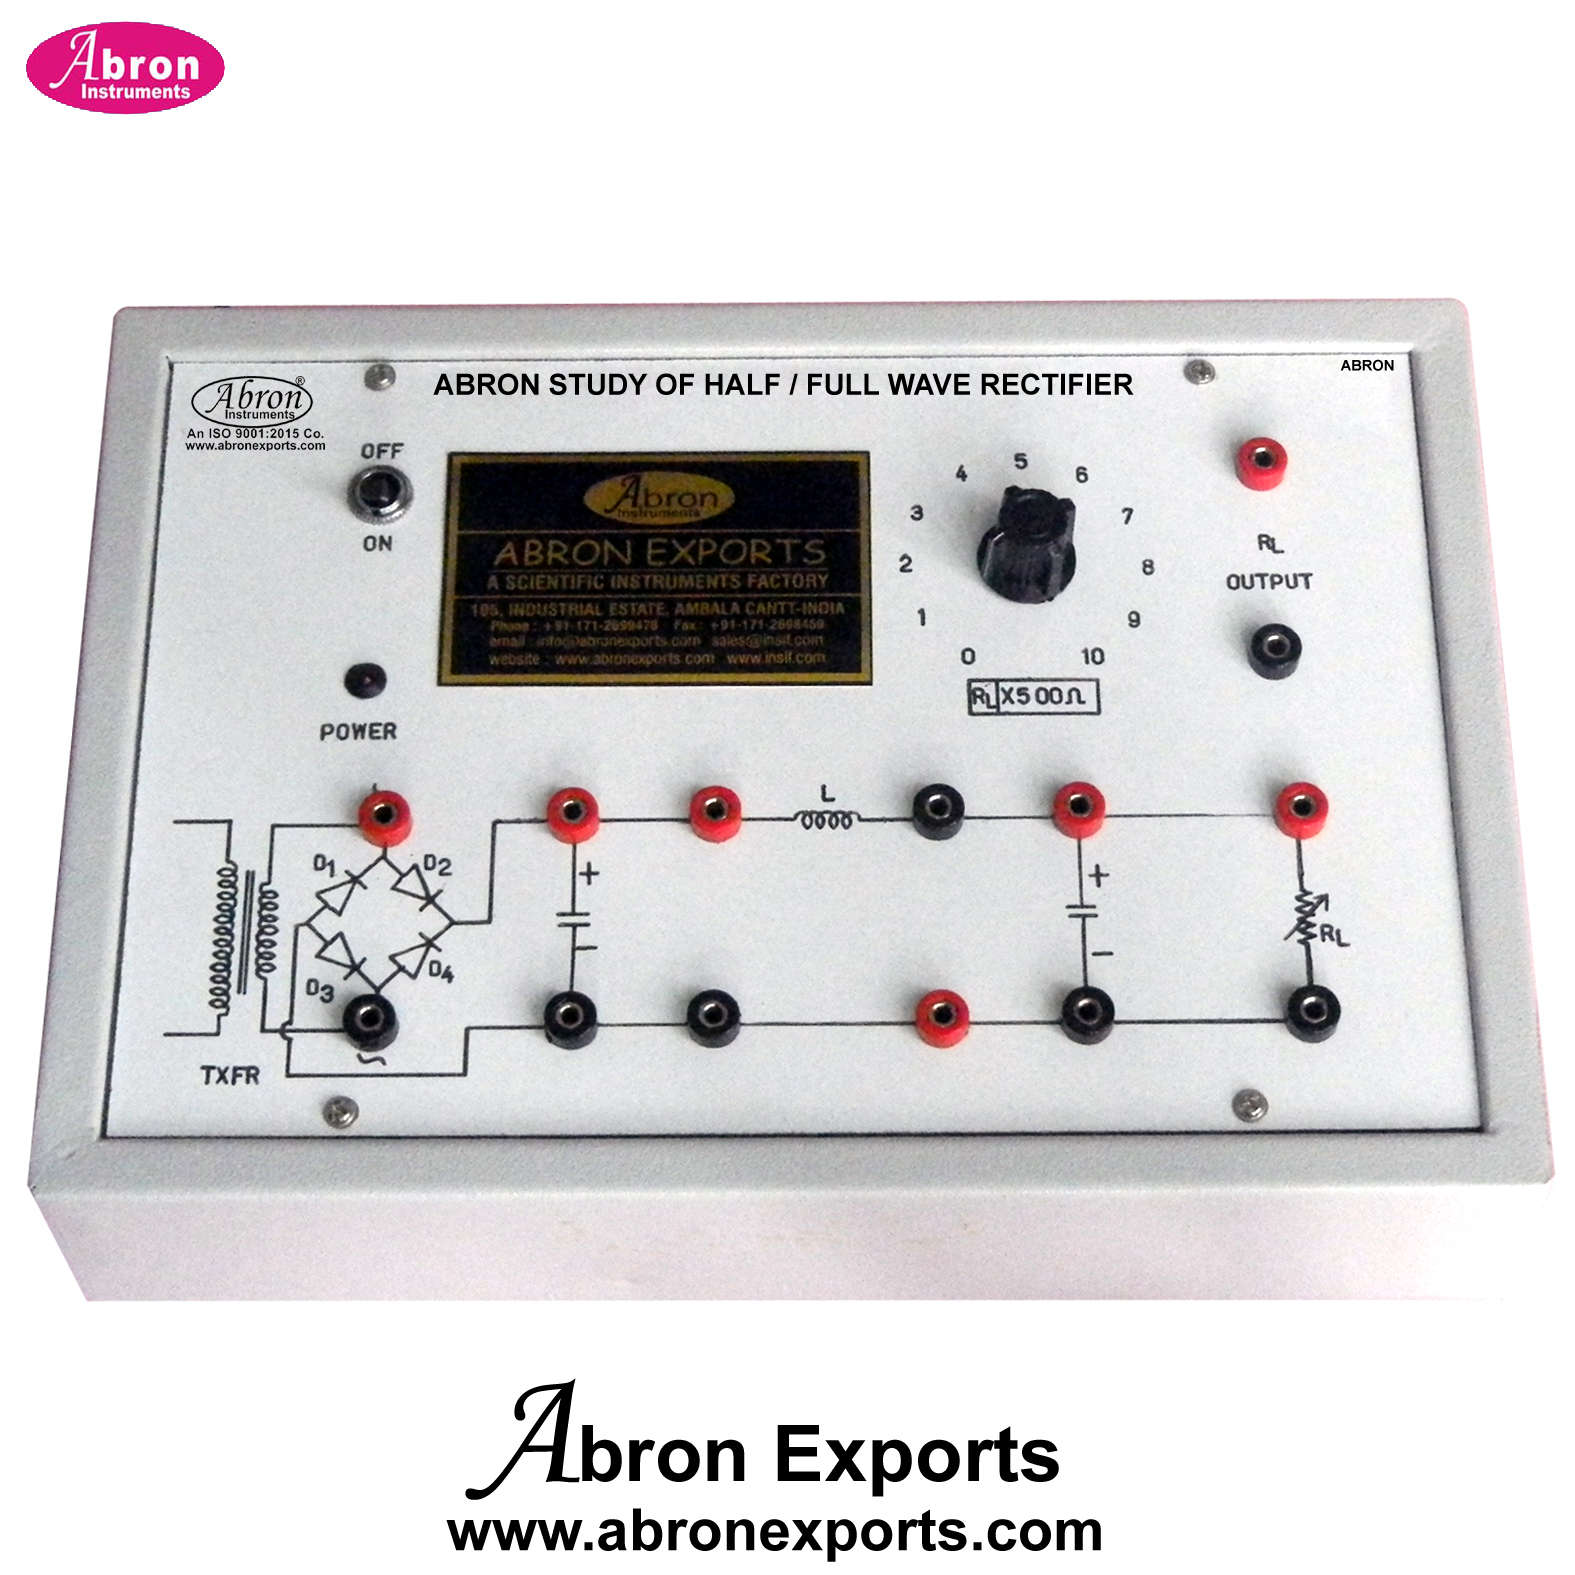 Diode As Half/Full Waver Bridge Rectifier no meter electronic trainer Kit with sockets power supply AE-1251B